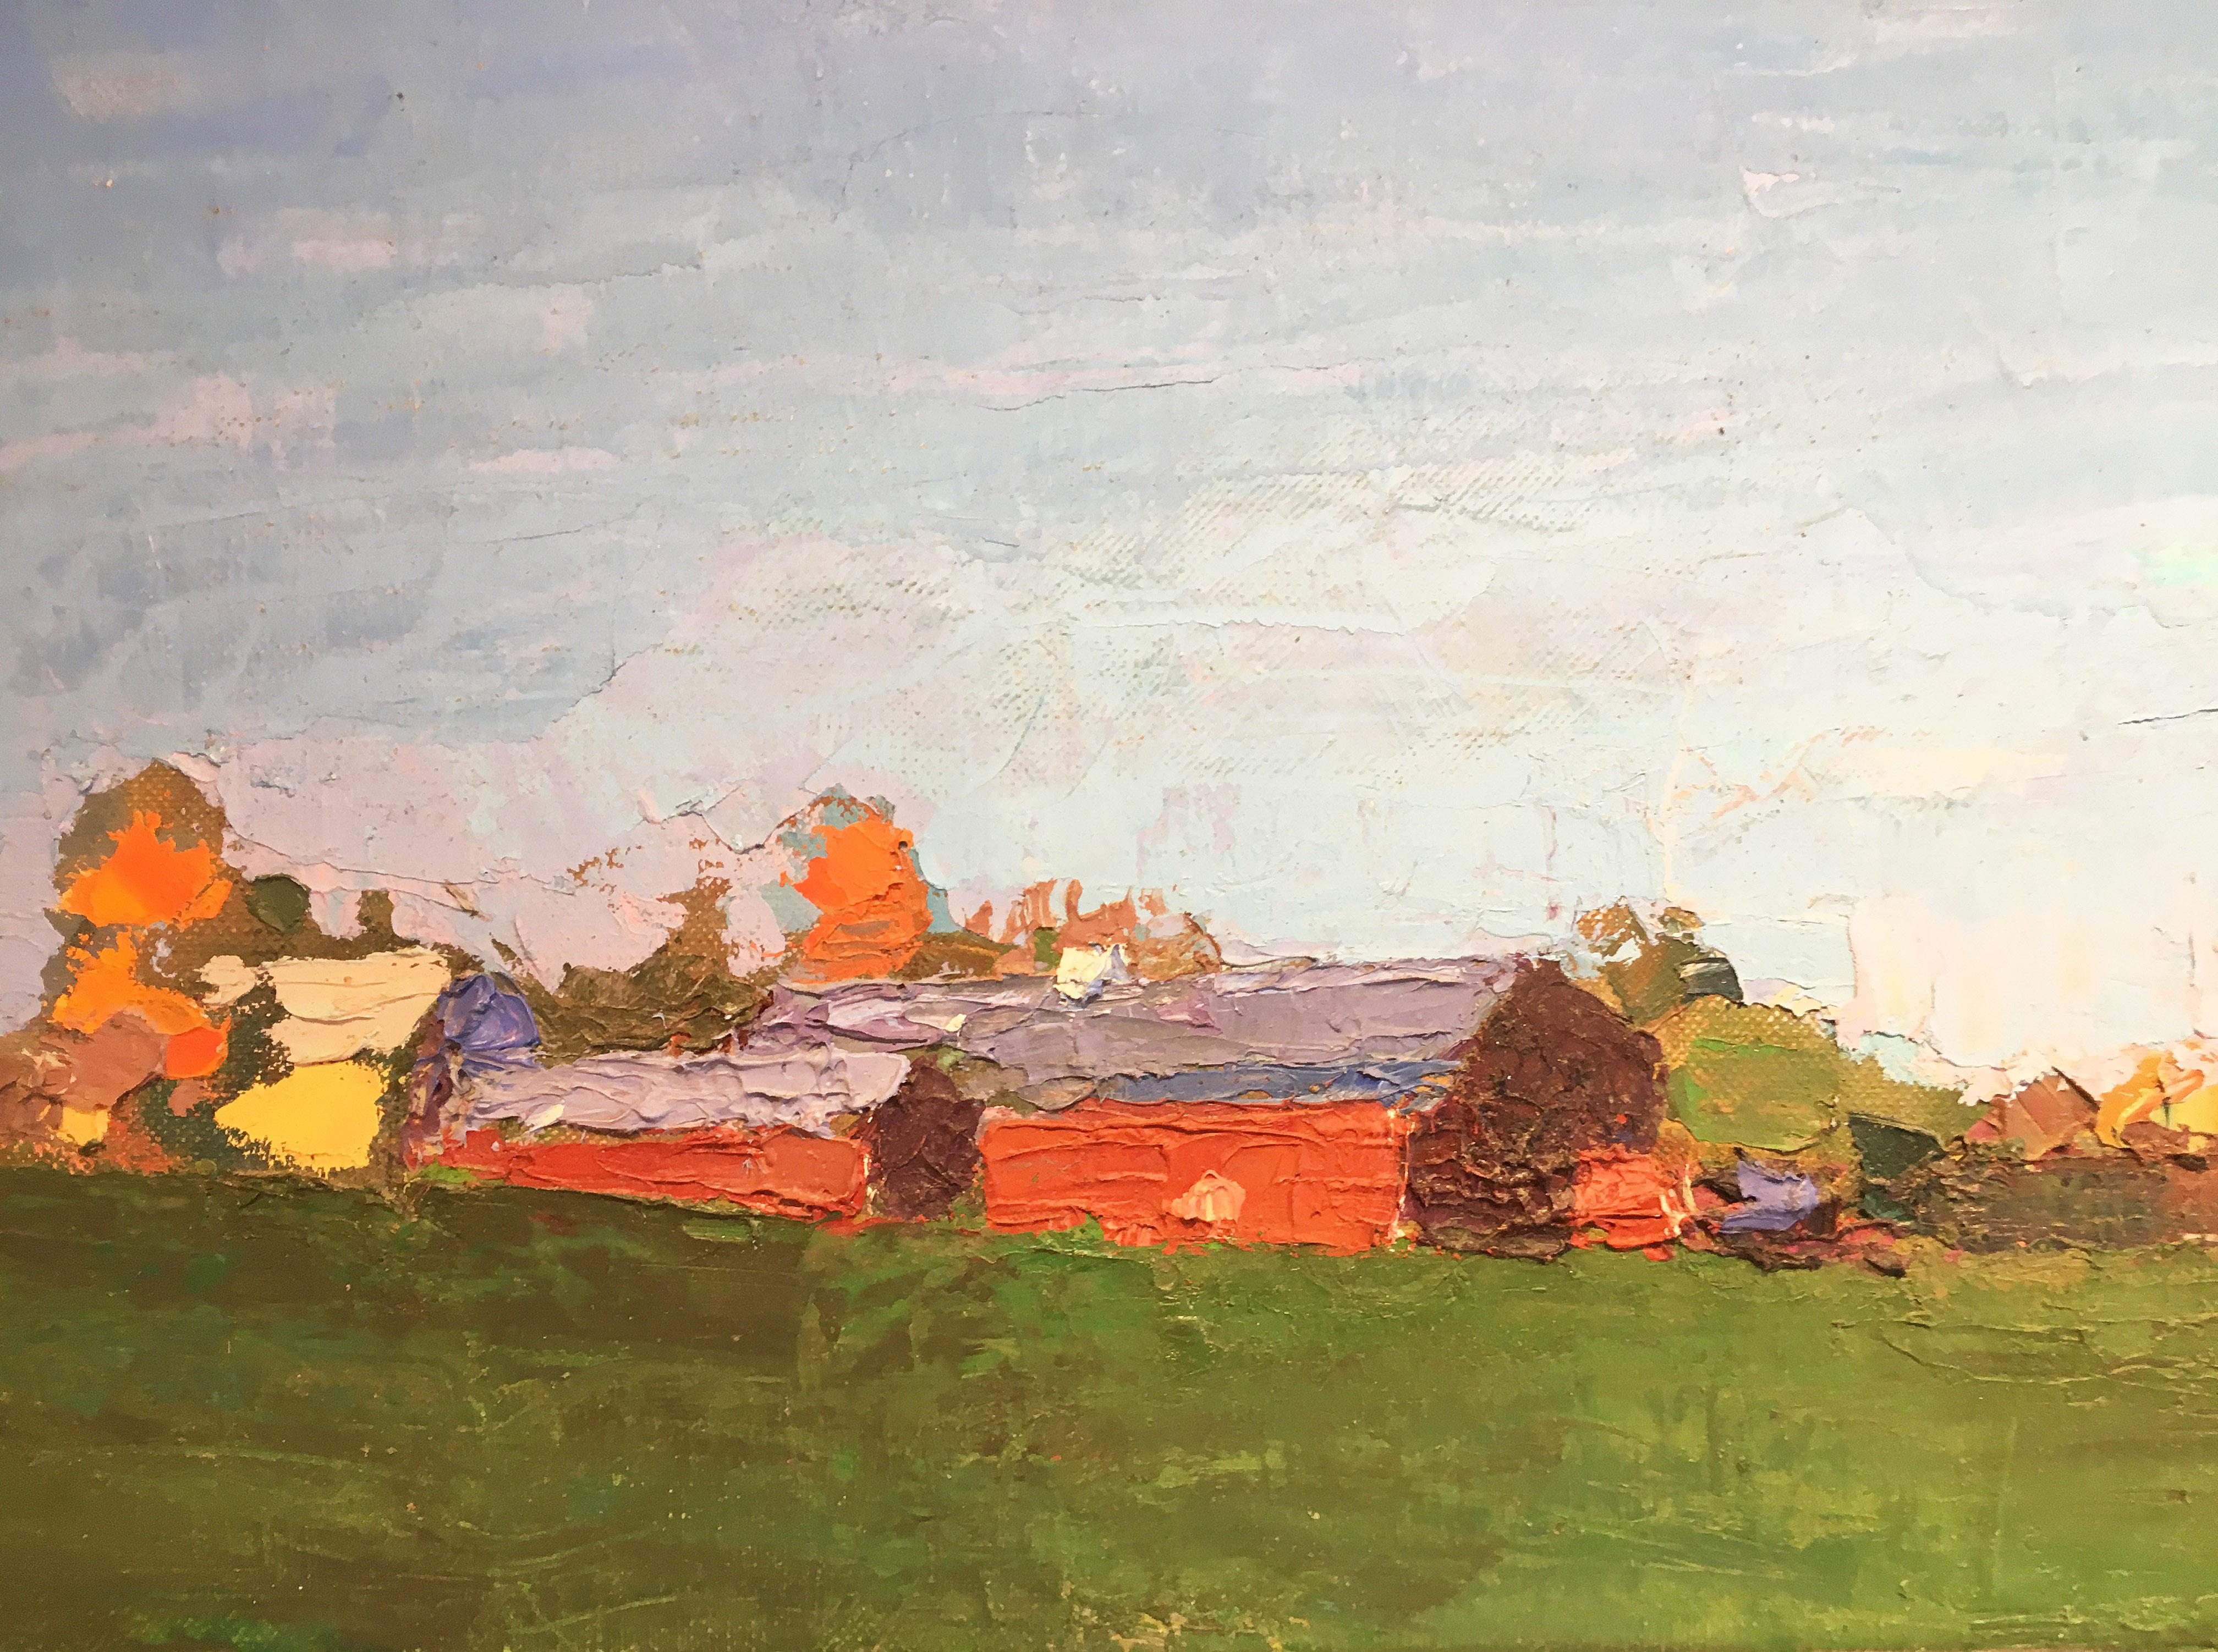 'Vermont Fall Panorama’ 2009 by Contemporary American impressionist landscape artist, Larry Horowitz. Oil on canvas, 10 x 48 in. This painting features an Impressionist rural landscape in rich colors of blue, green, red, orange, brown, yellow, grey,